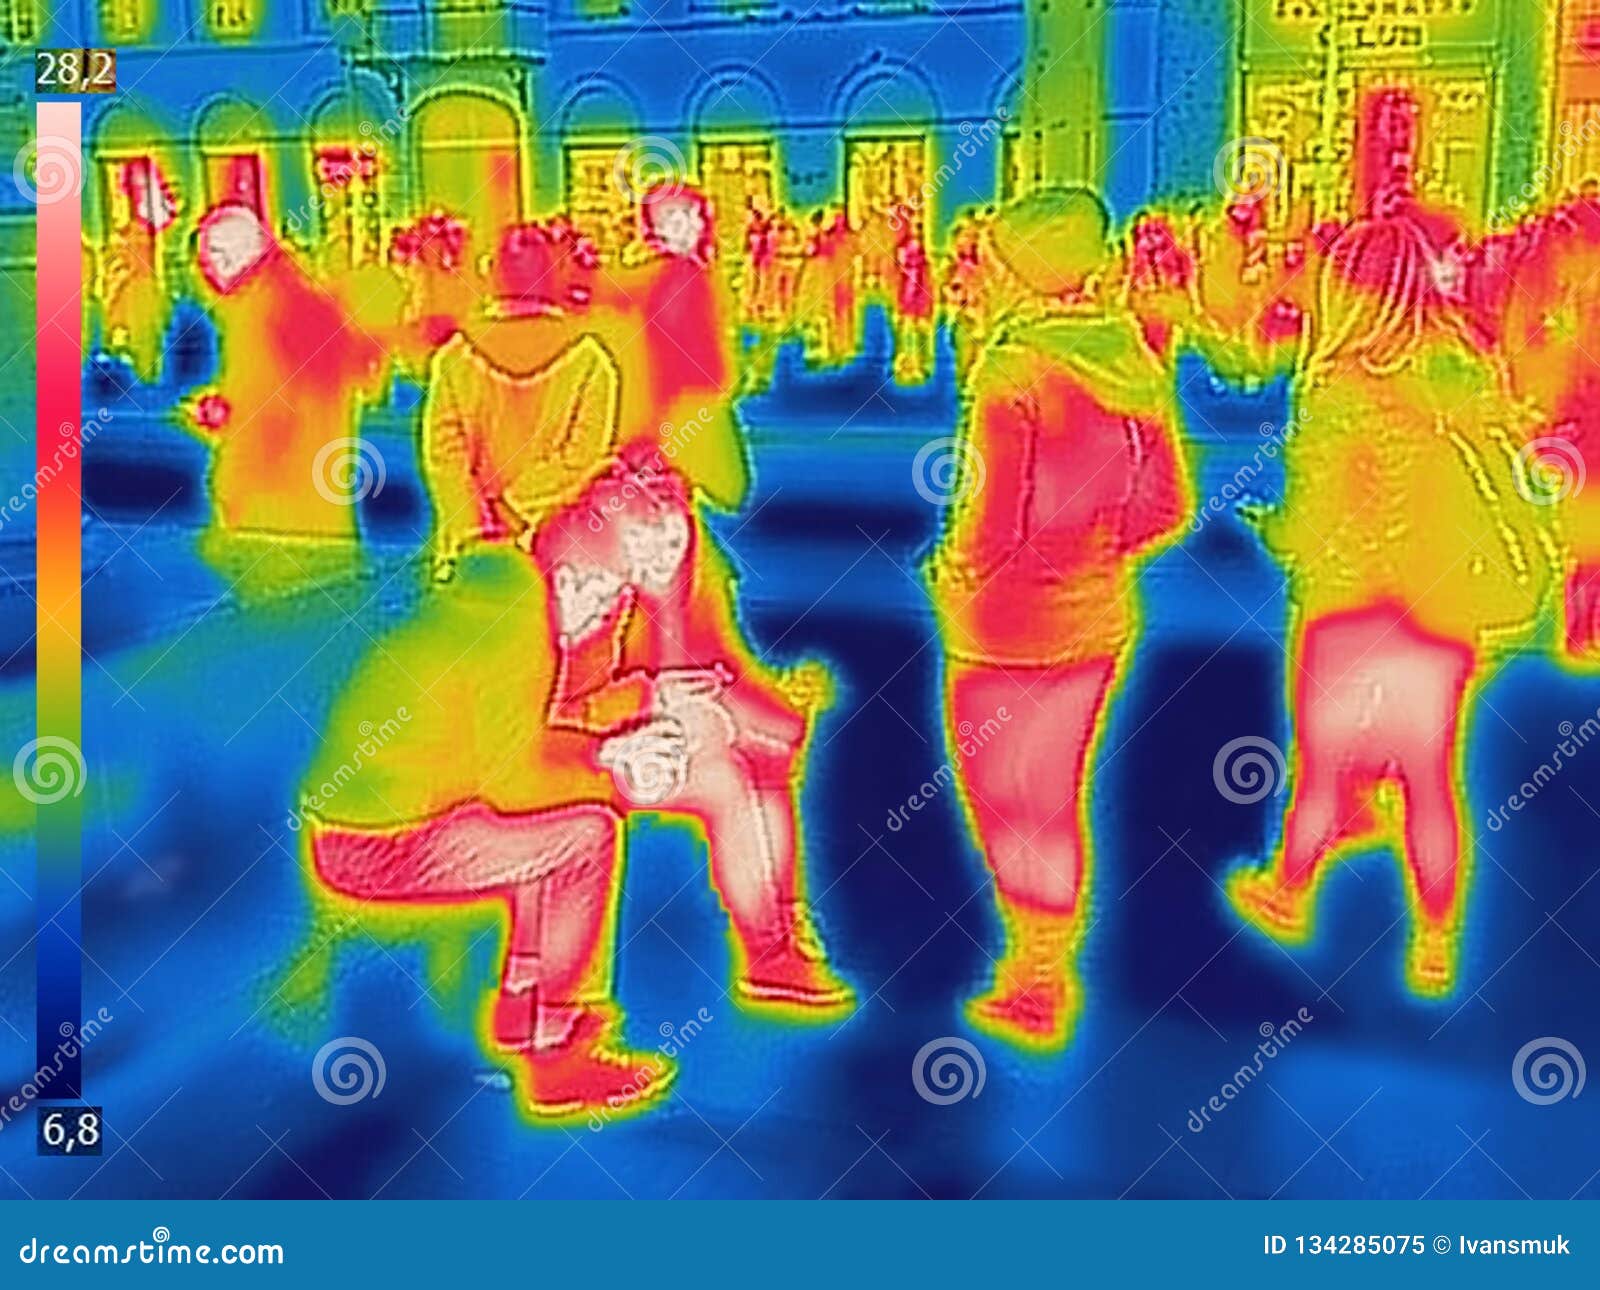 infrared thermal image of people at the city railway station on a cold winter day